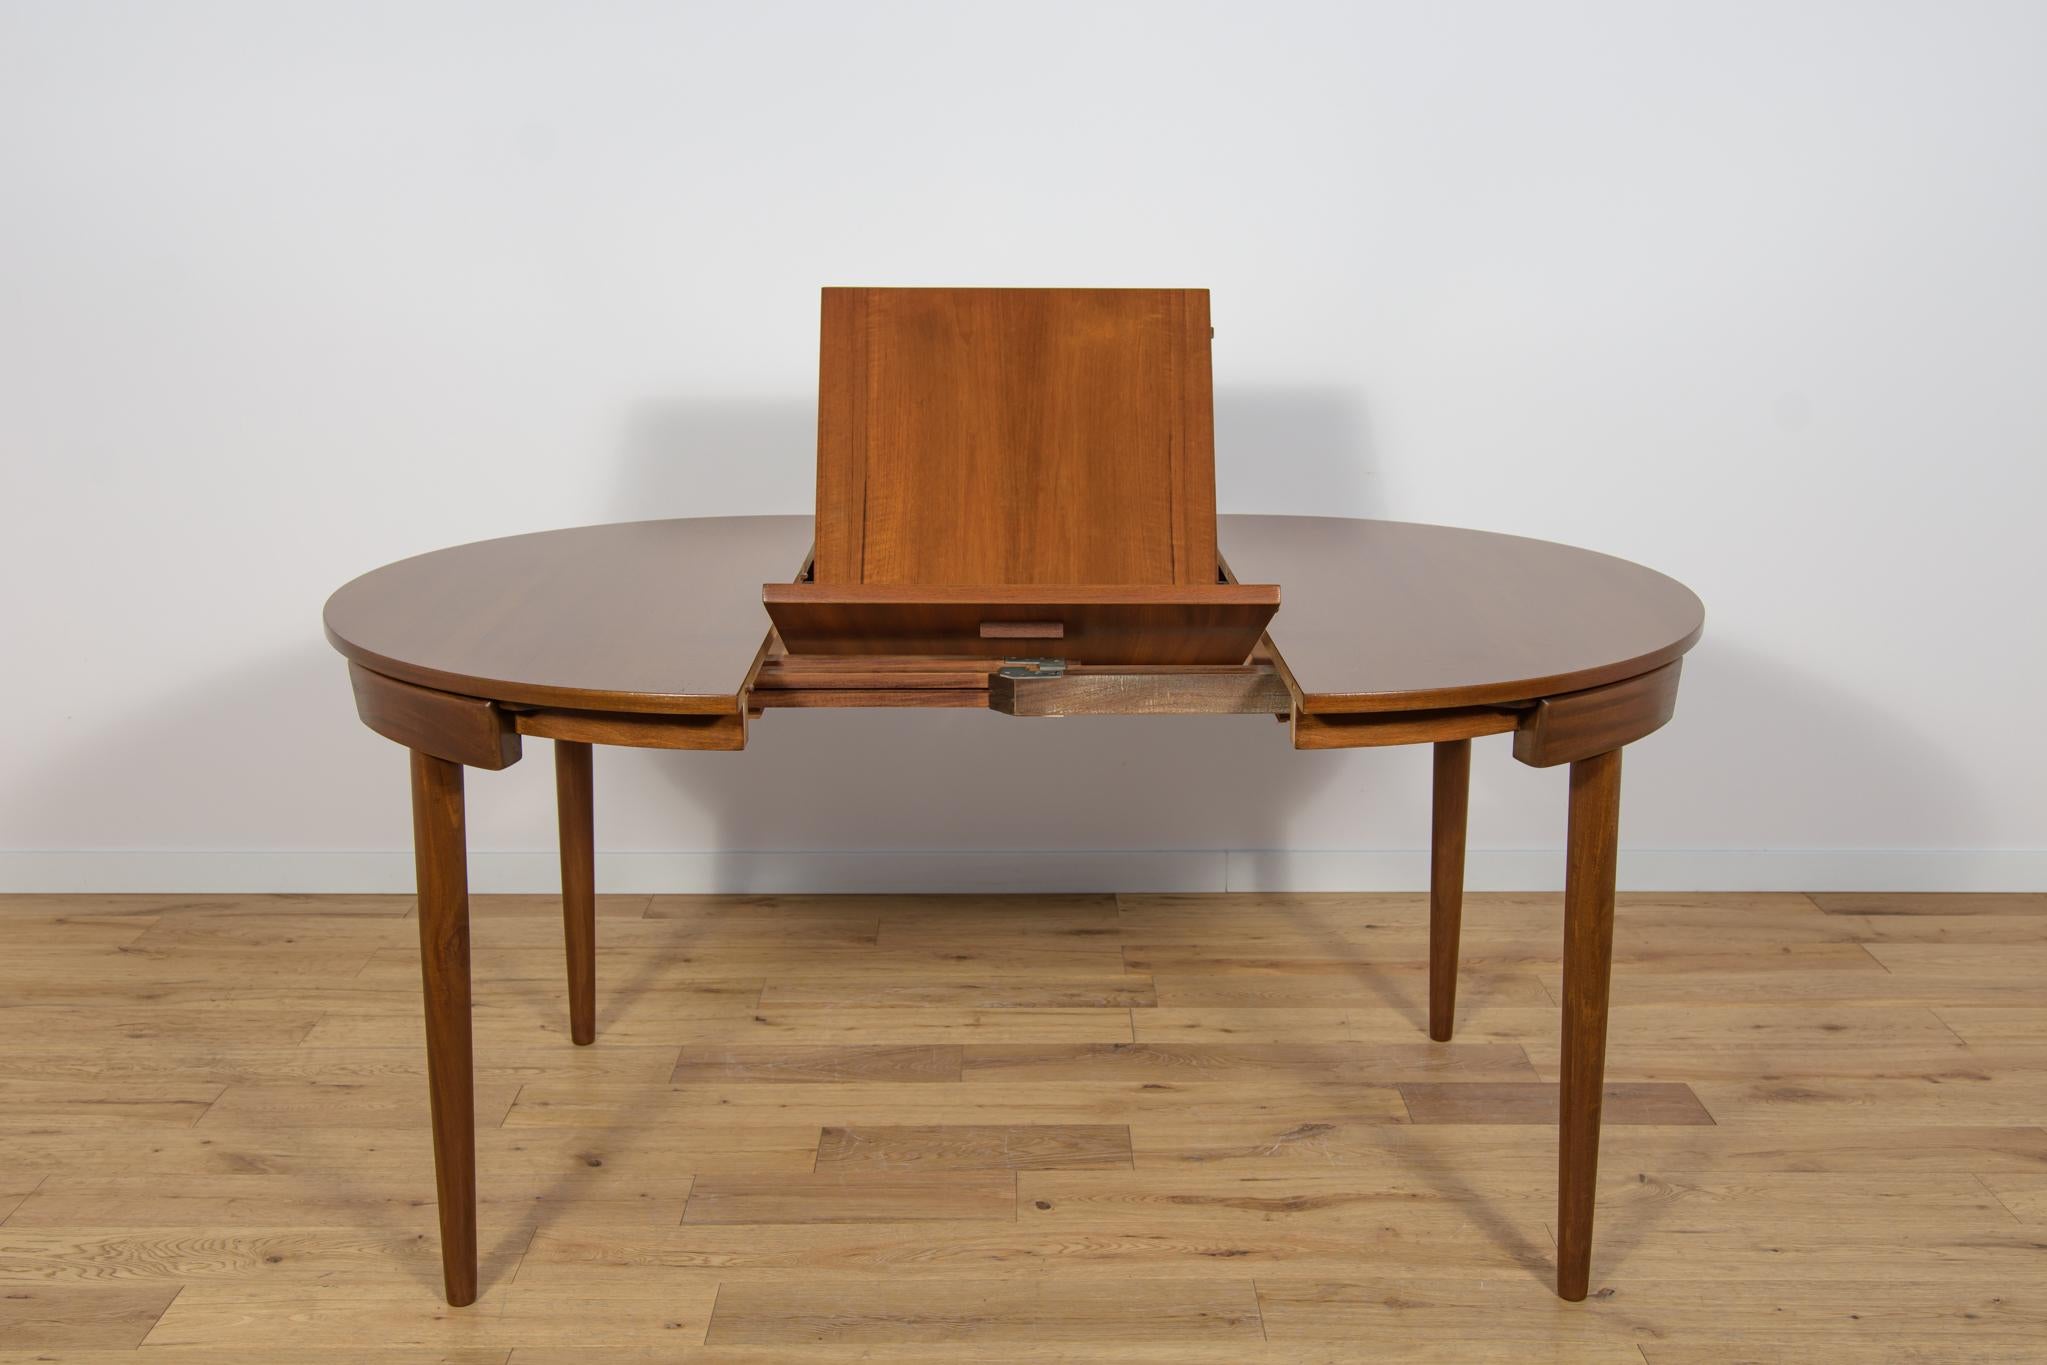  Mid-Century Teak Dining Table and Chairs Set by Hans Olsen for Frem Røjle. For Sale 6